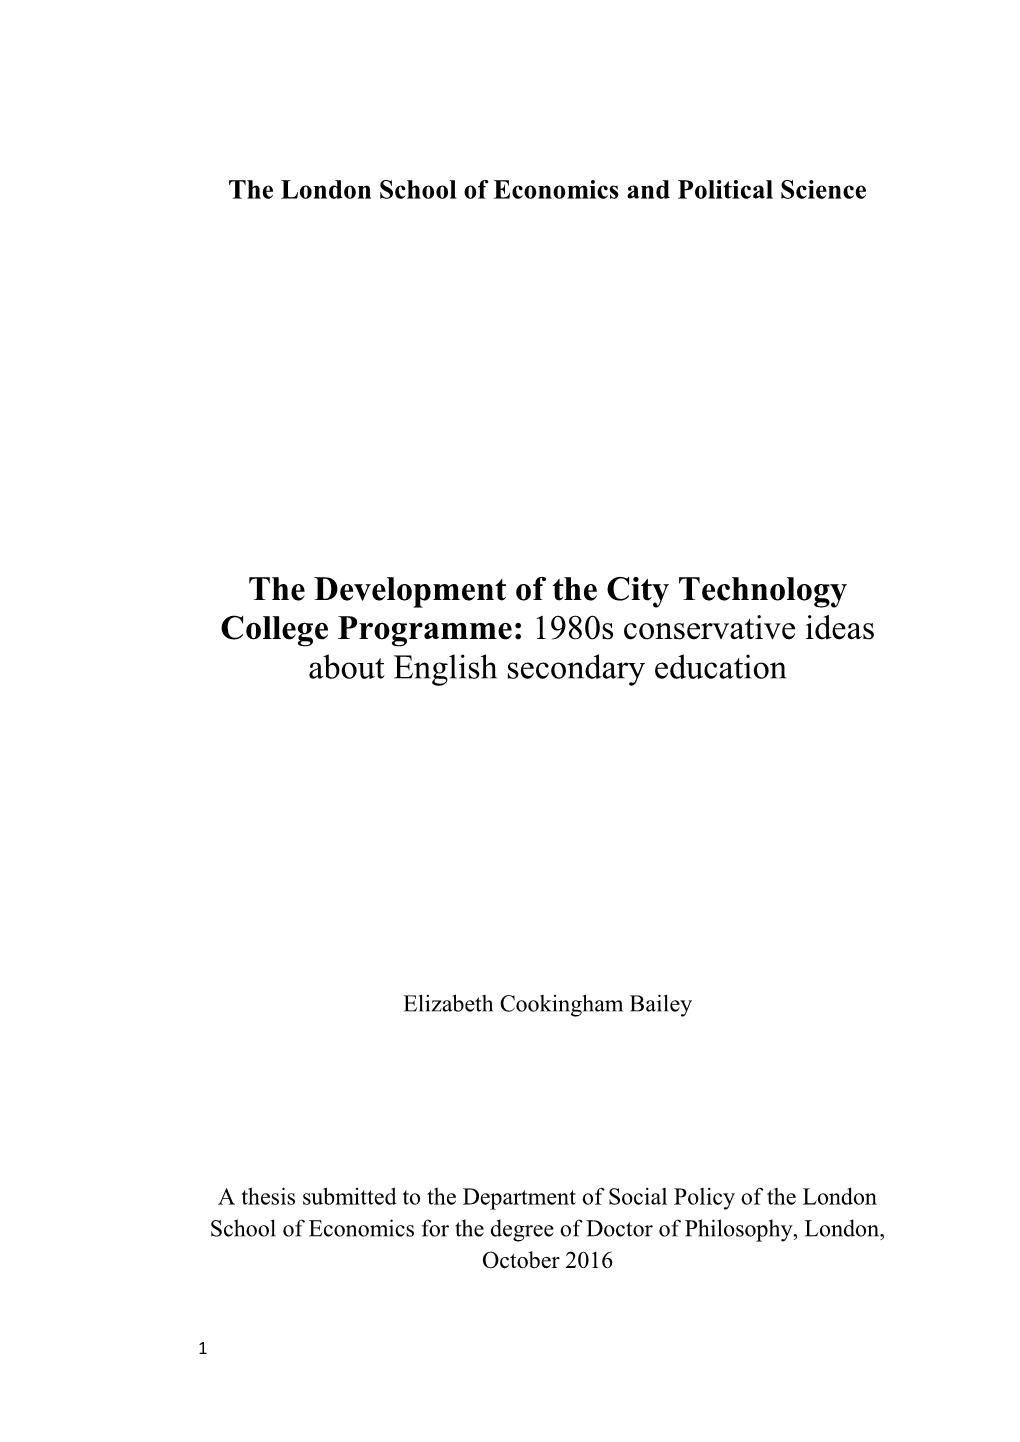 The Development of the City Technology College Programme: 1980S Conservative Ideas About English Secondary Education